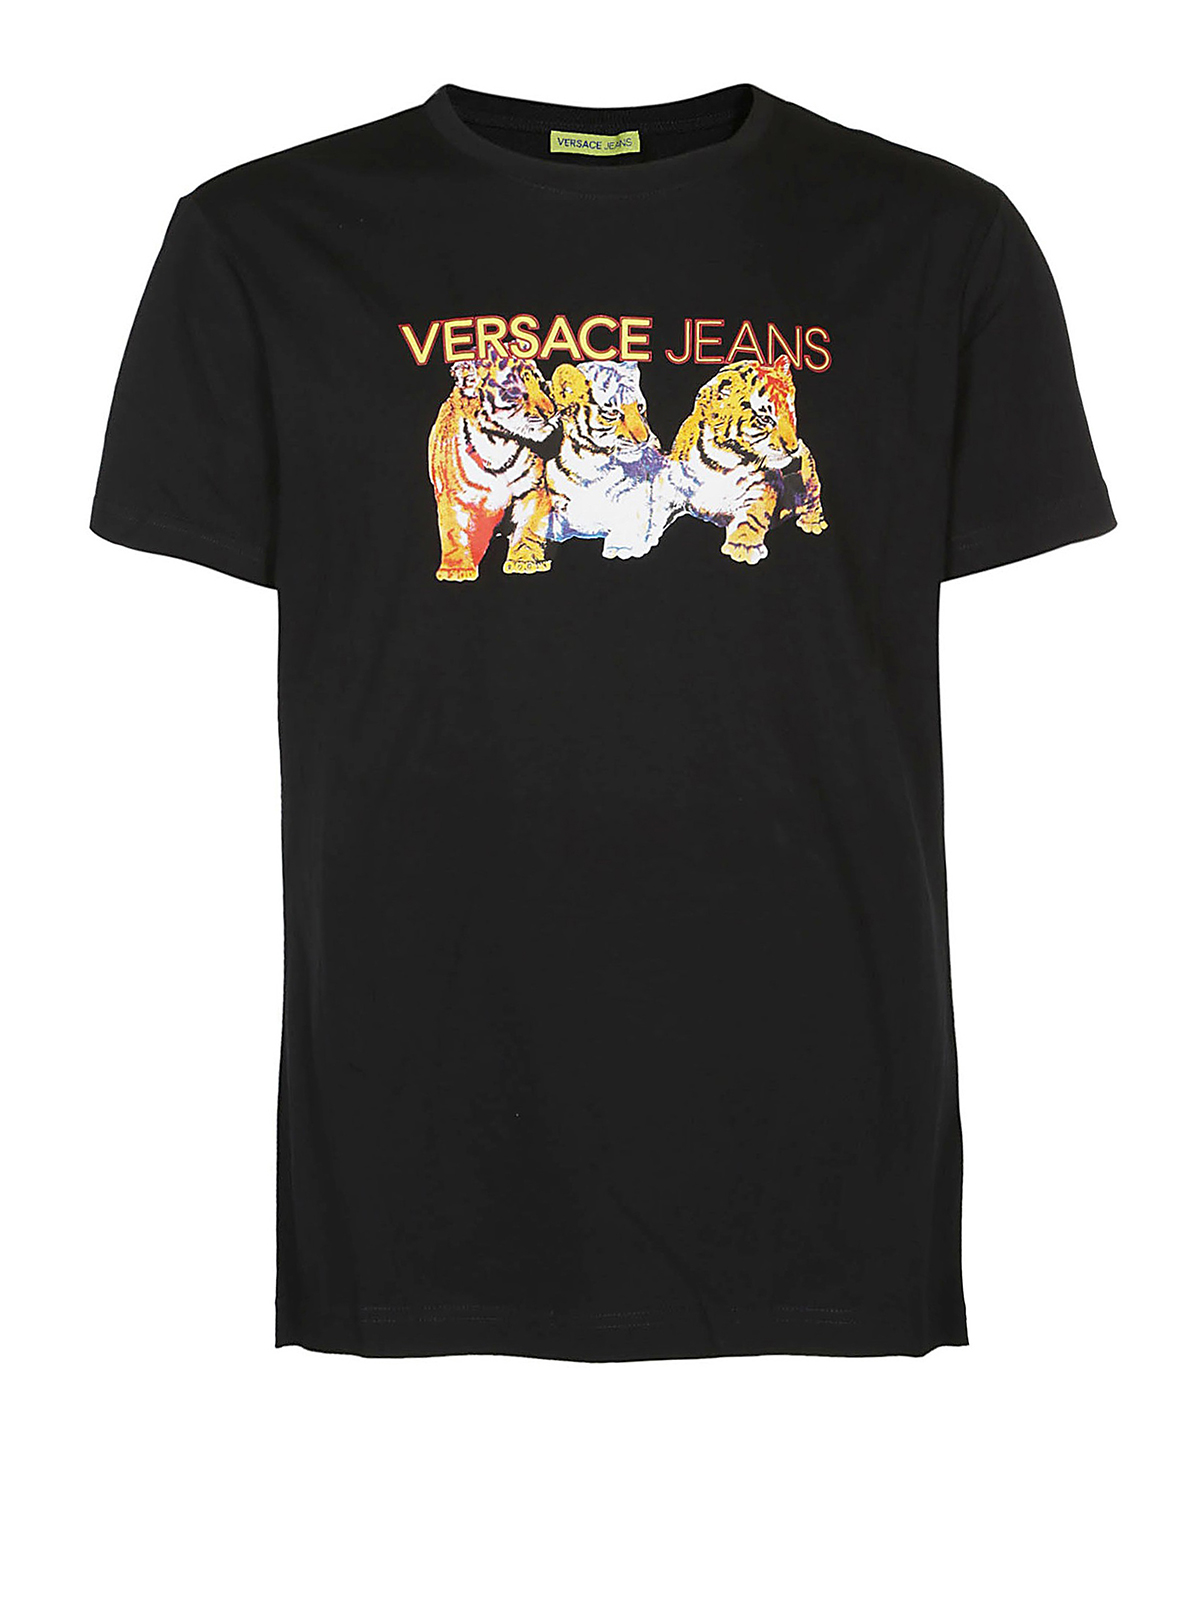 Versace Jeans Black/Gold Tiger T-Shirt - T-Shirts from